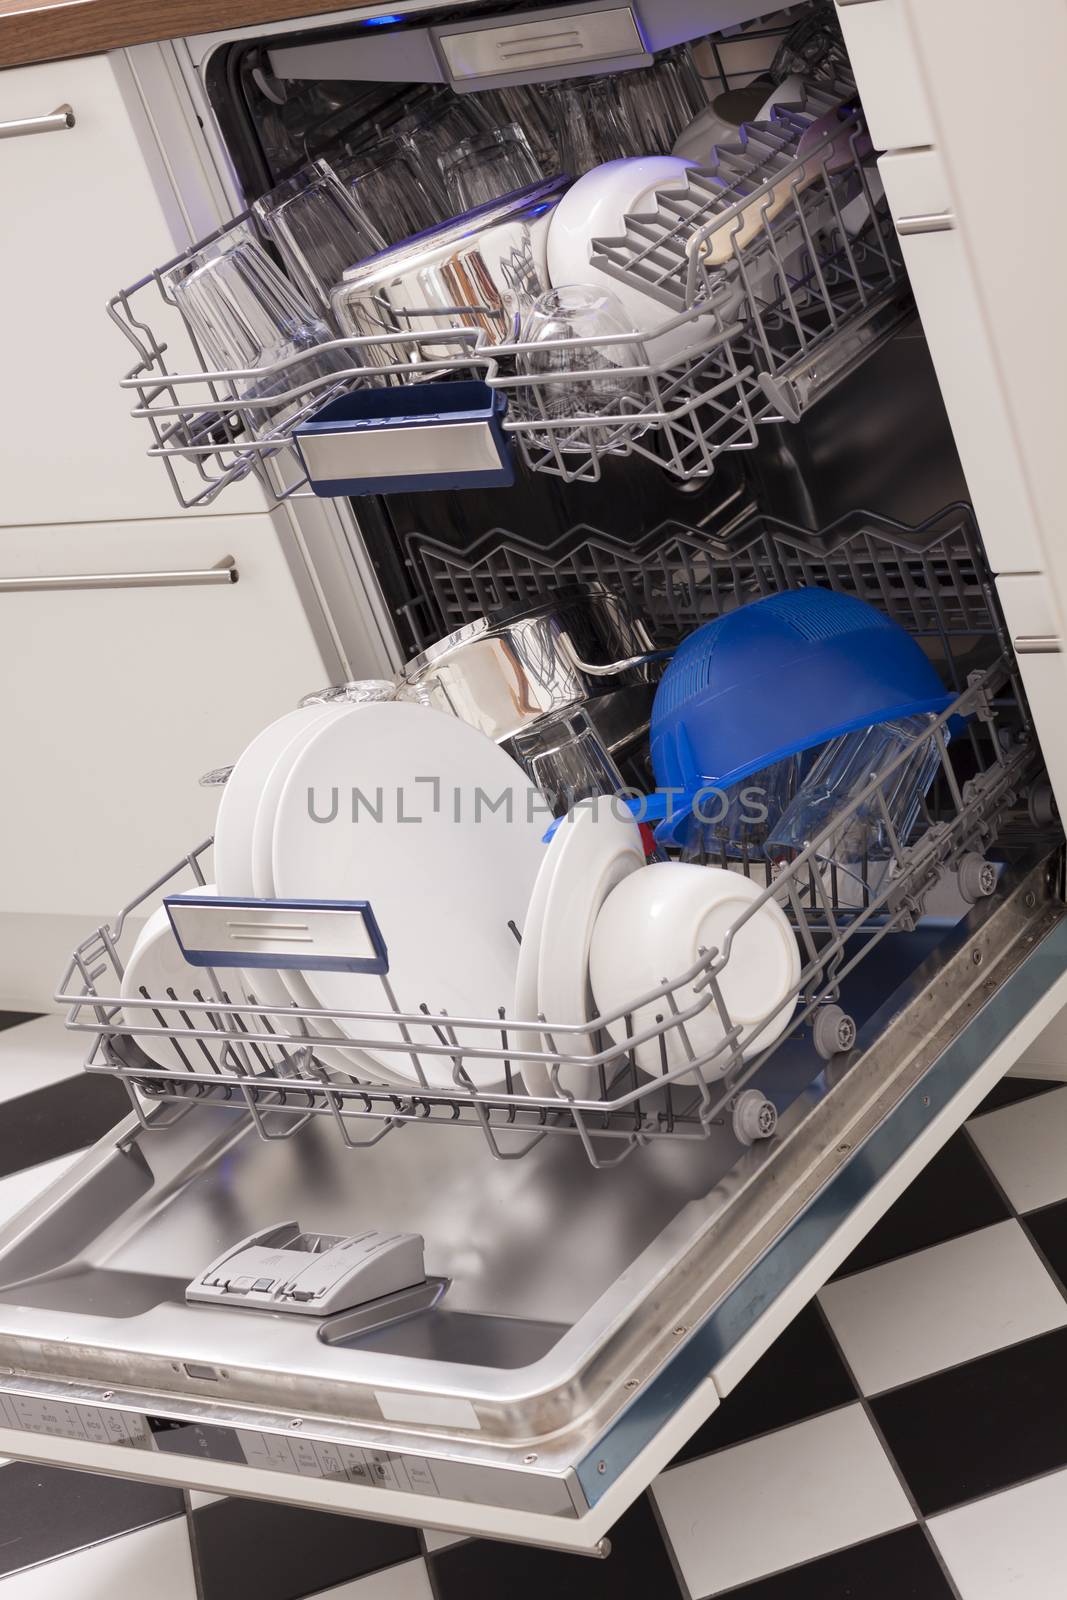 Dishwasher loades in a kitchen with clean dishes and blue light